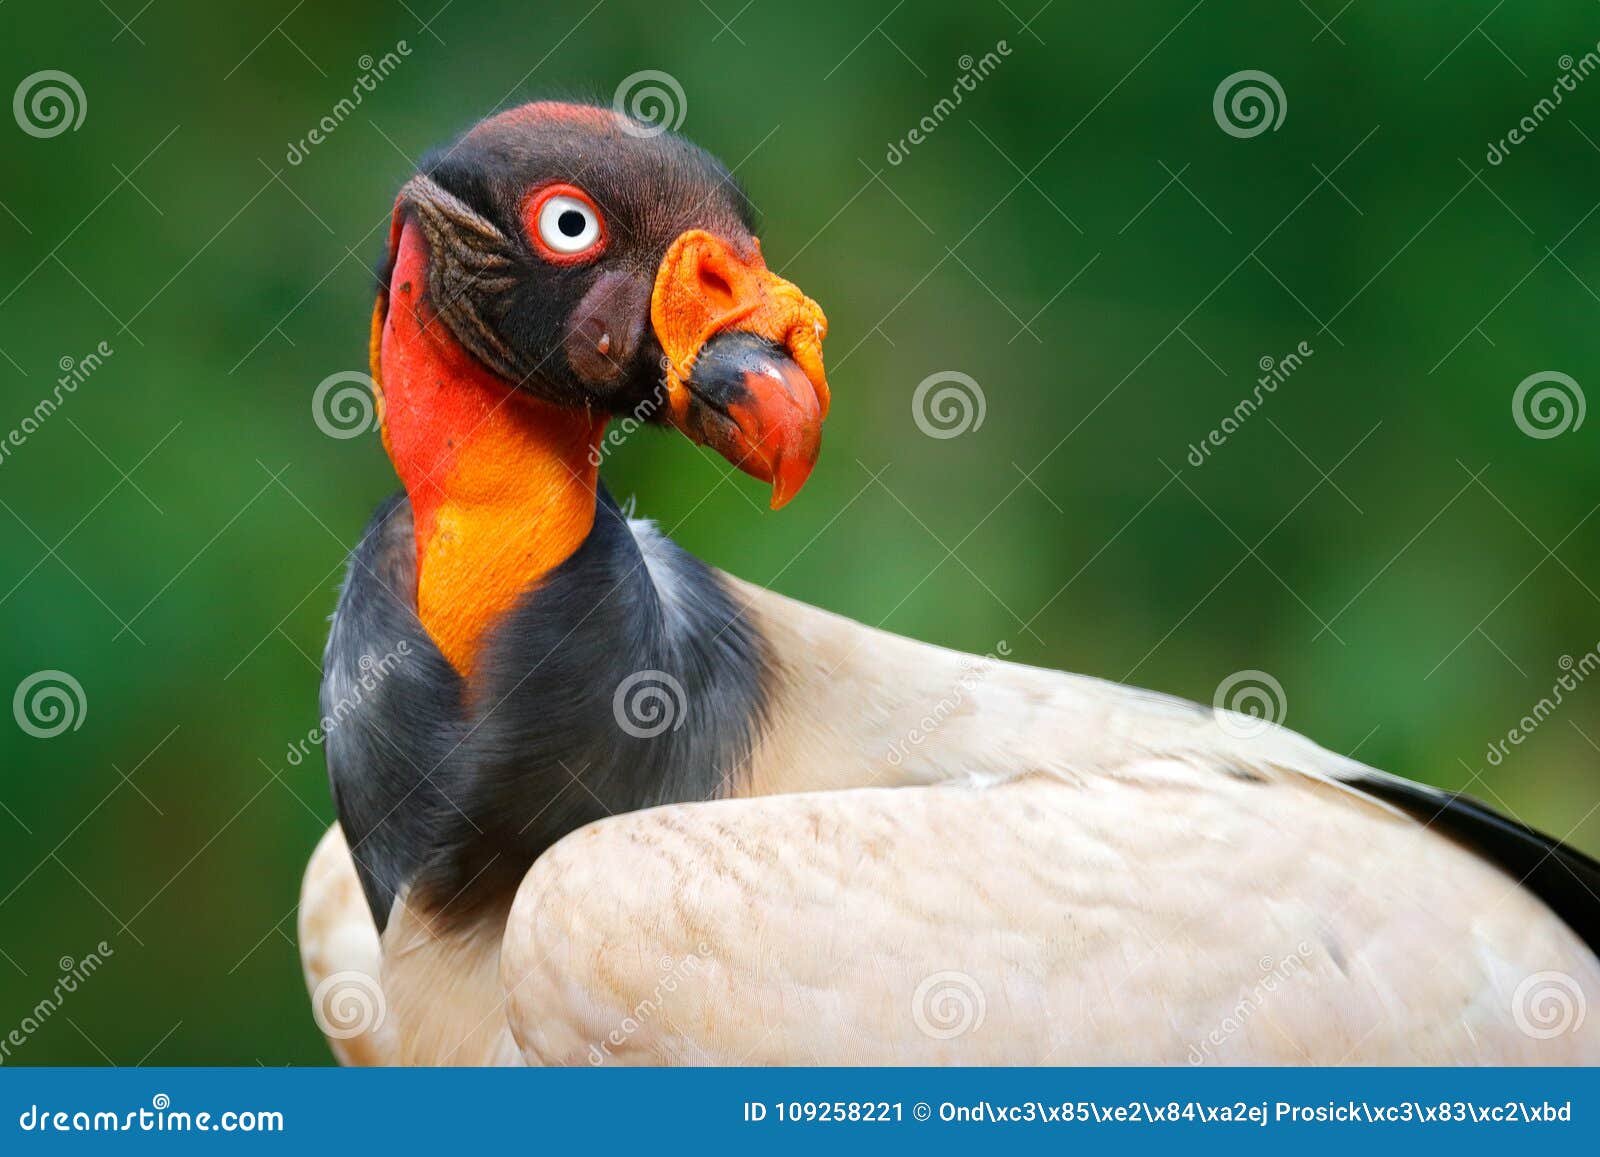 red orange portrait condor. king vulture, sarcoramphus papa, large bird found in central and south america. flying bird, forest in